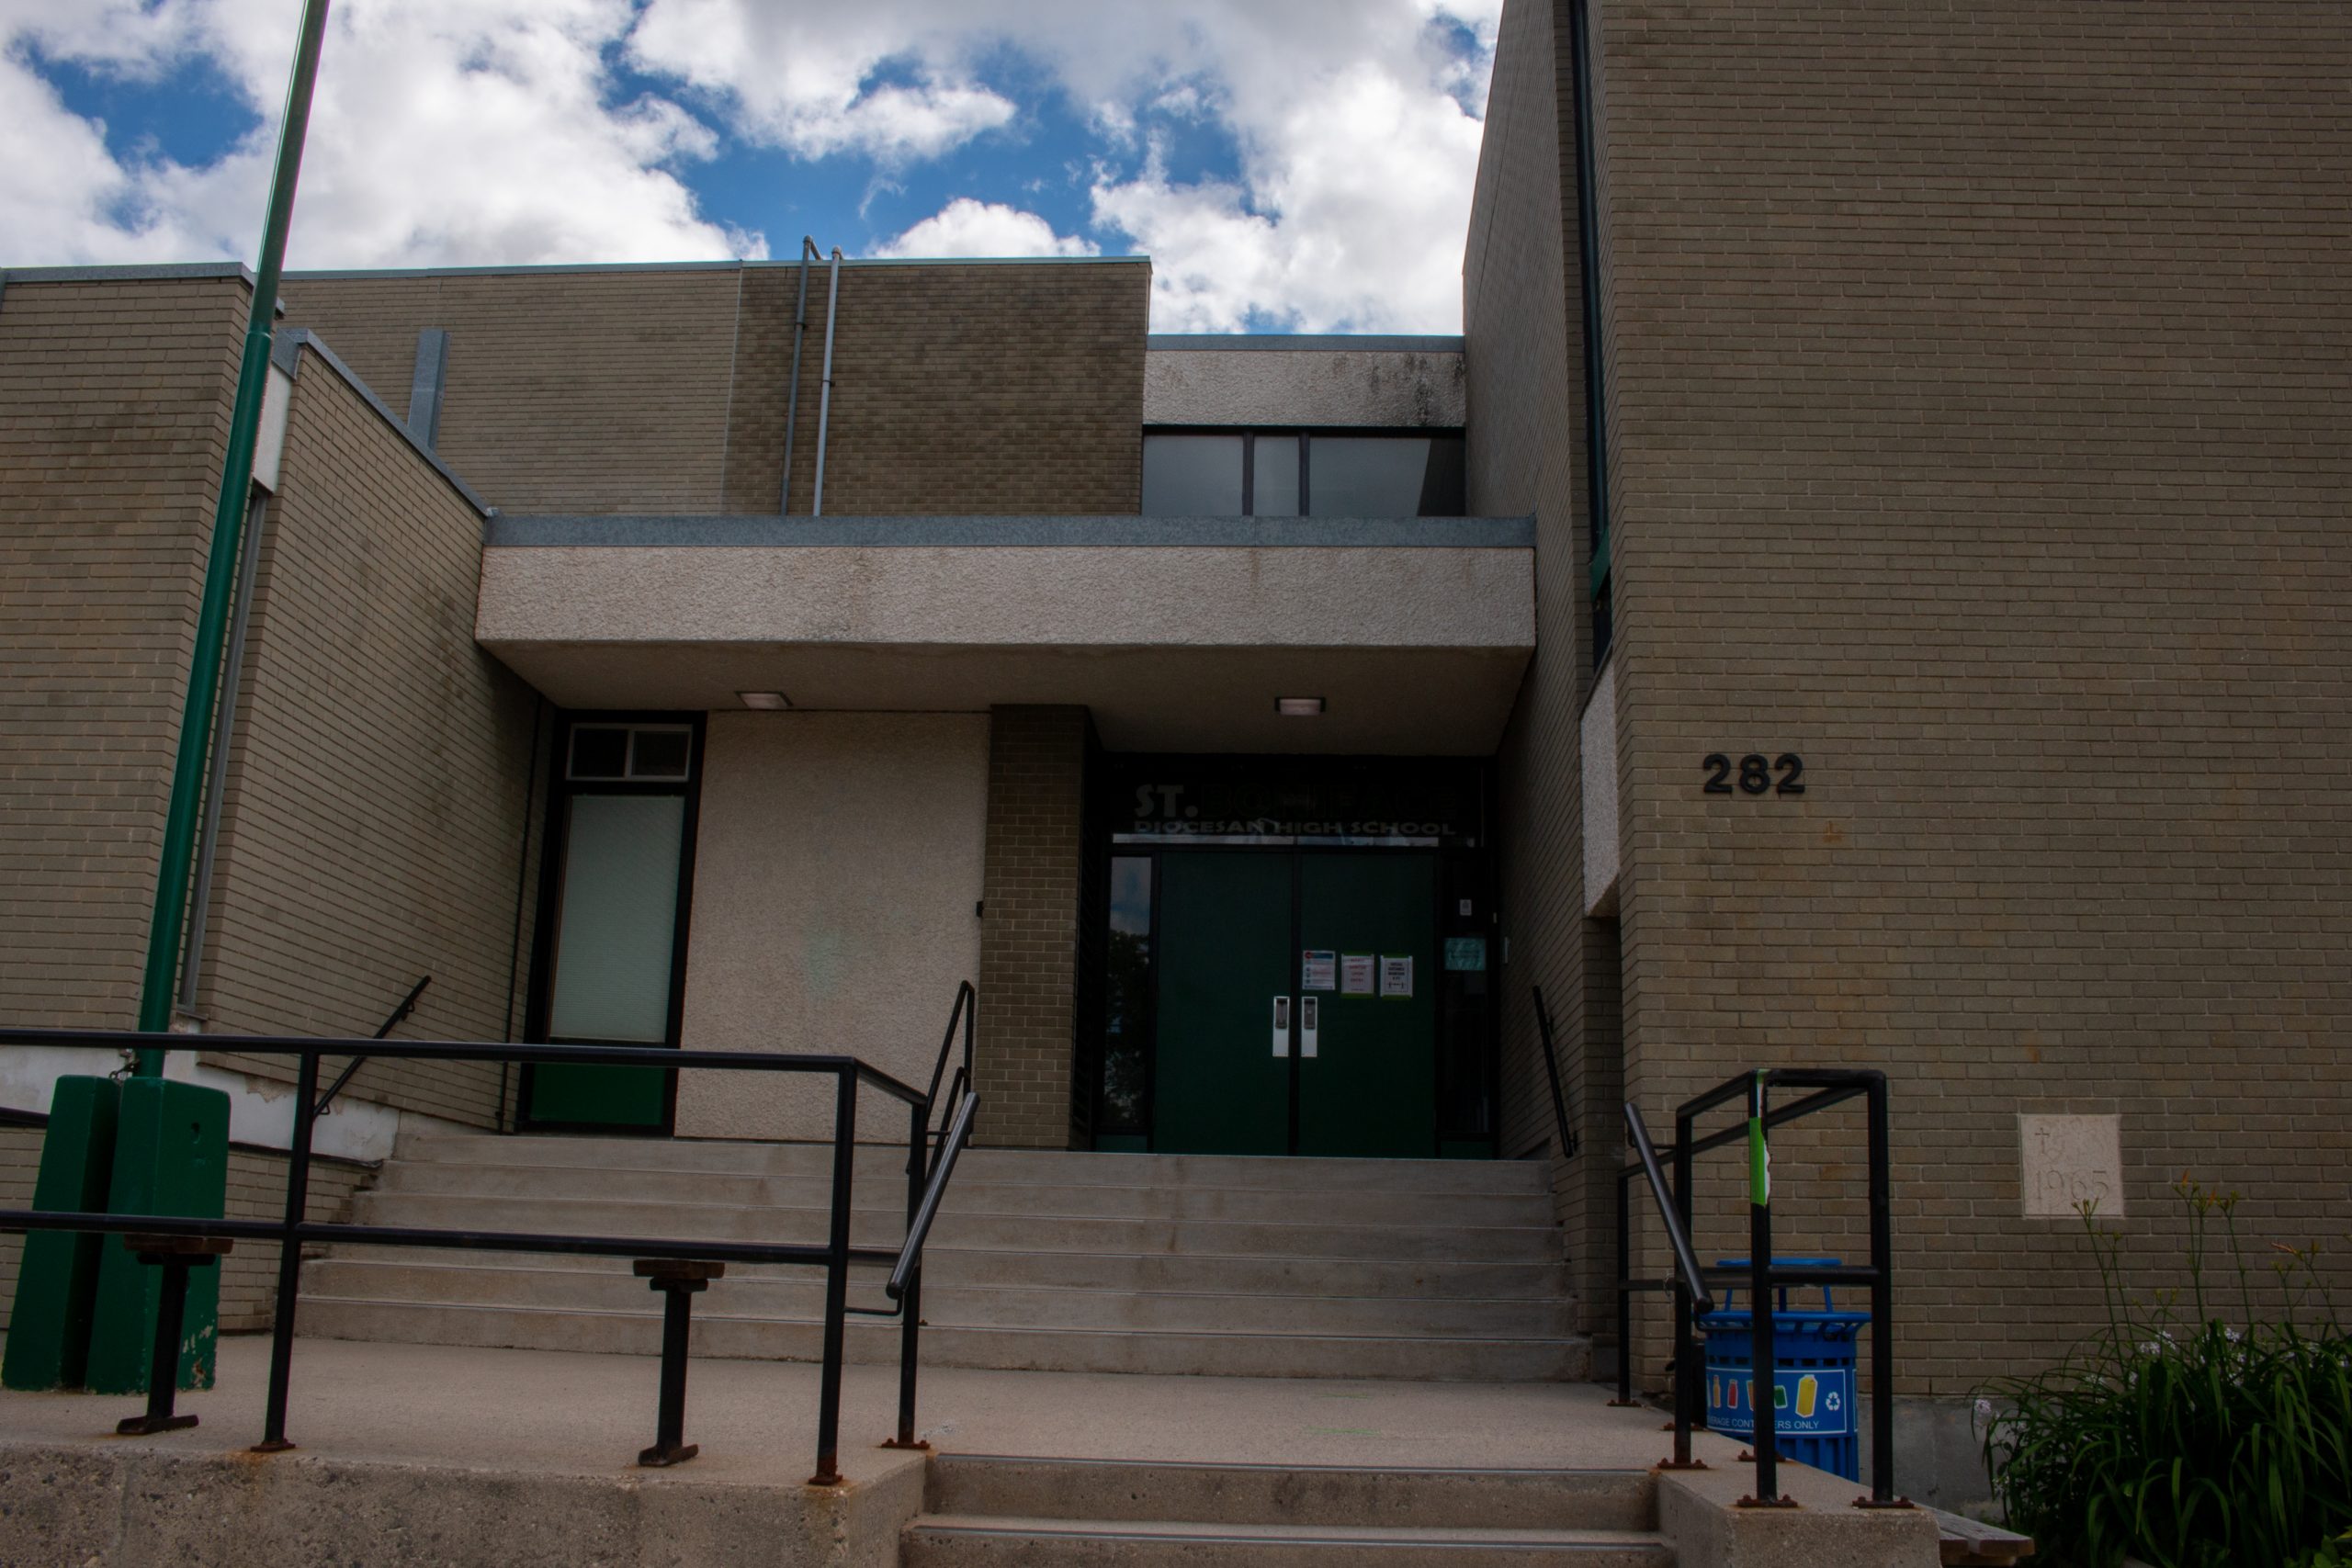 Detail photo of entryway to St. Boniface Diocesean High School at 282 Dubuc Street